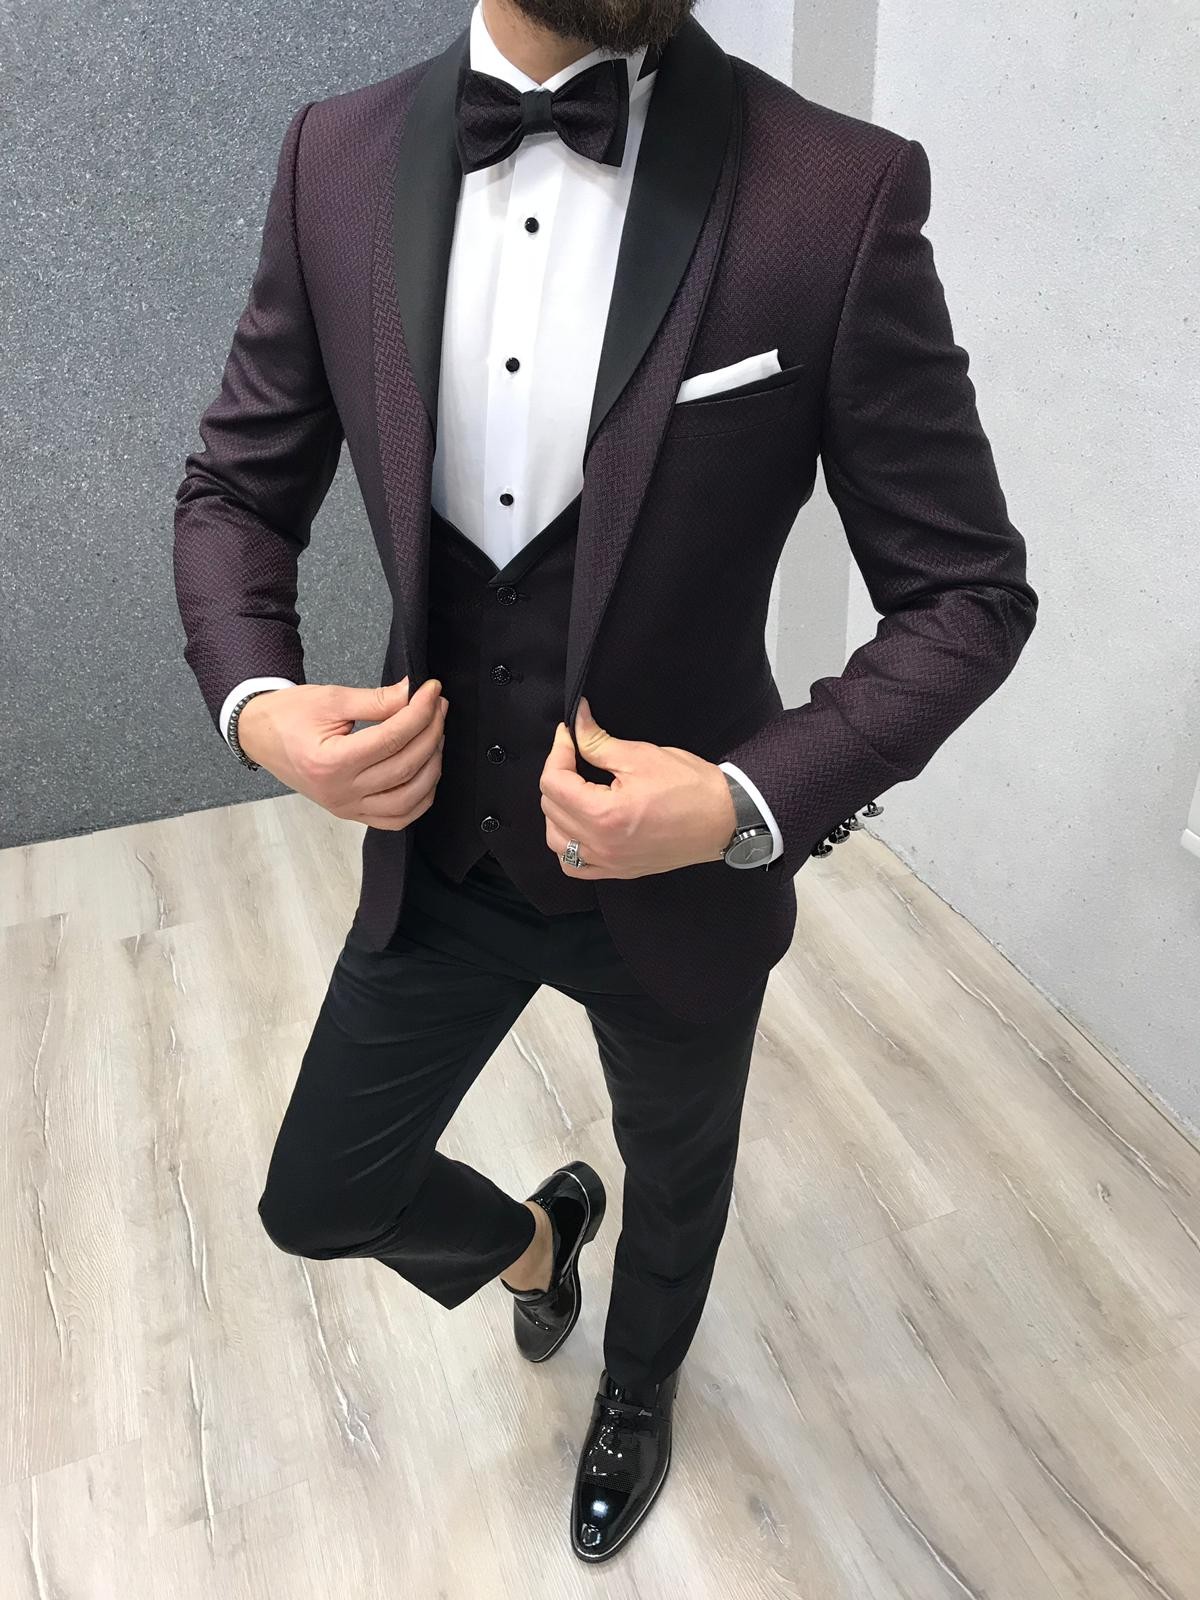 Buy Damson Slim Fit Tuxedo by Gentwith.com with Free Shipping